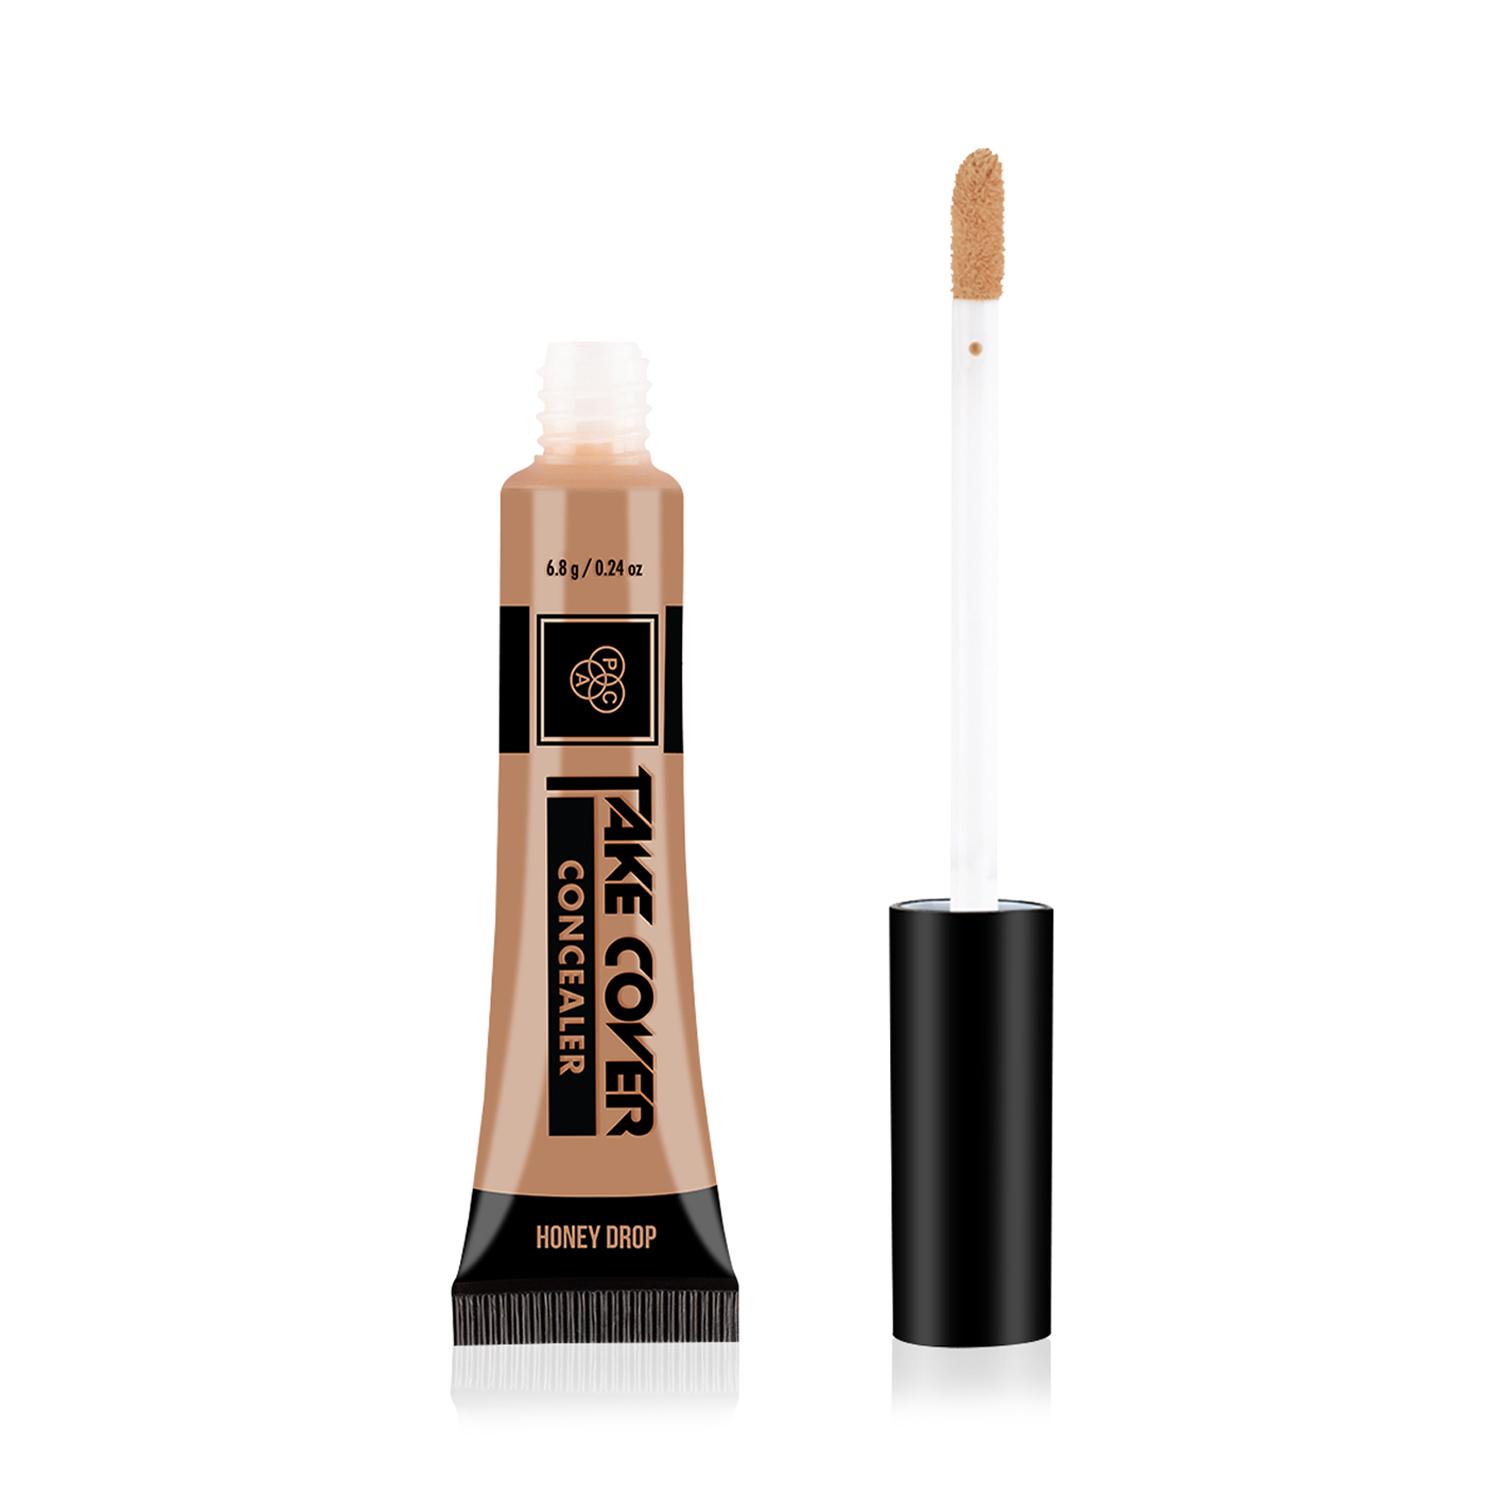 PAC | PAC Take Cover Concealer - 10 Honey Drop (6.8g)